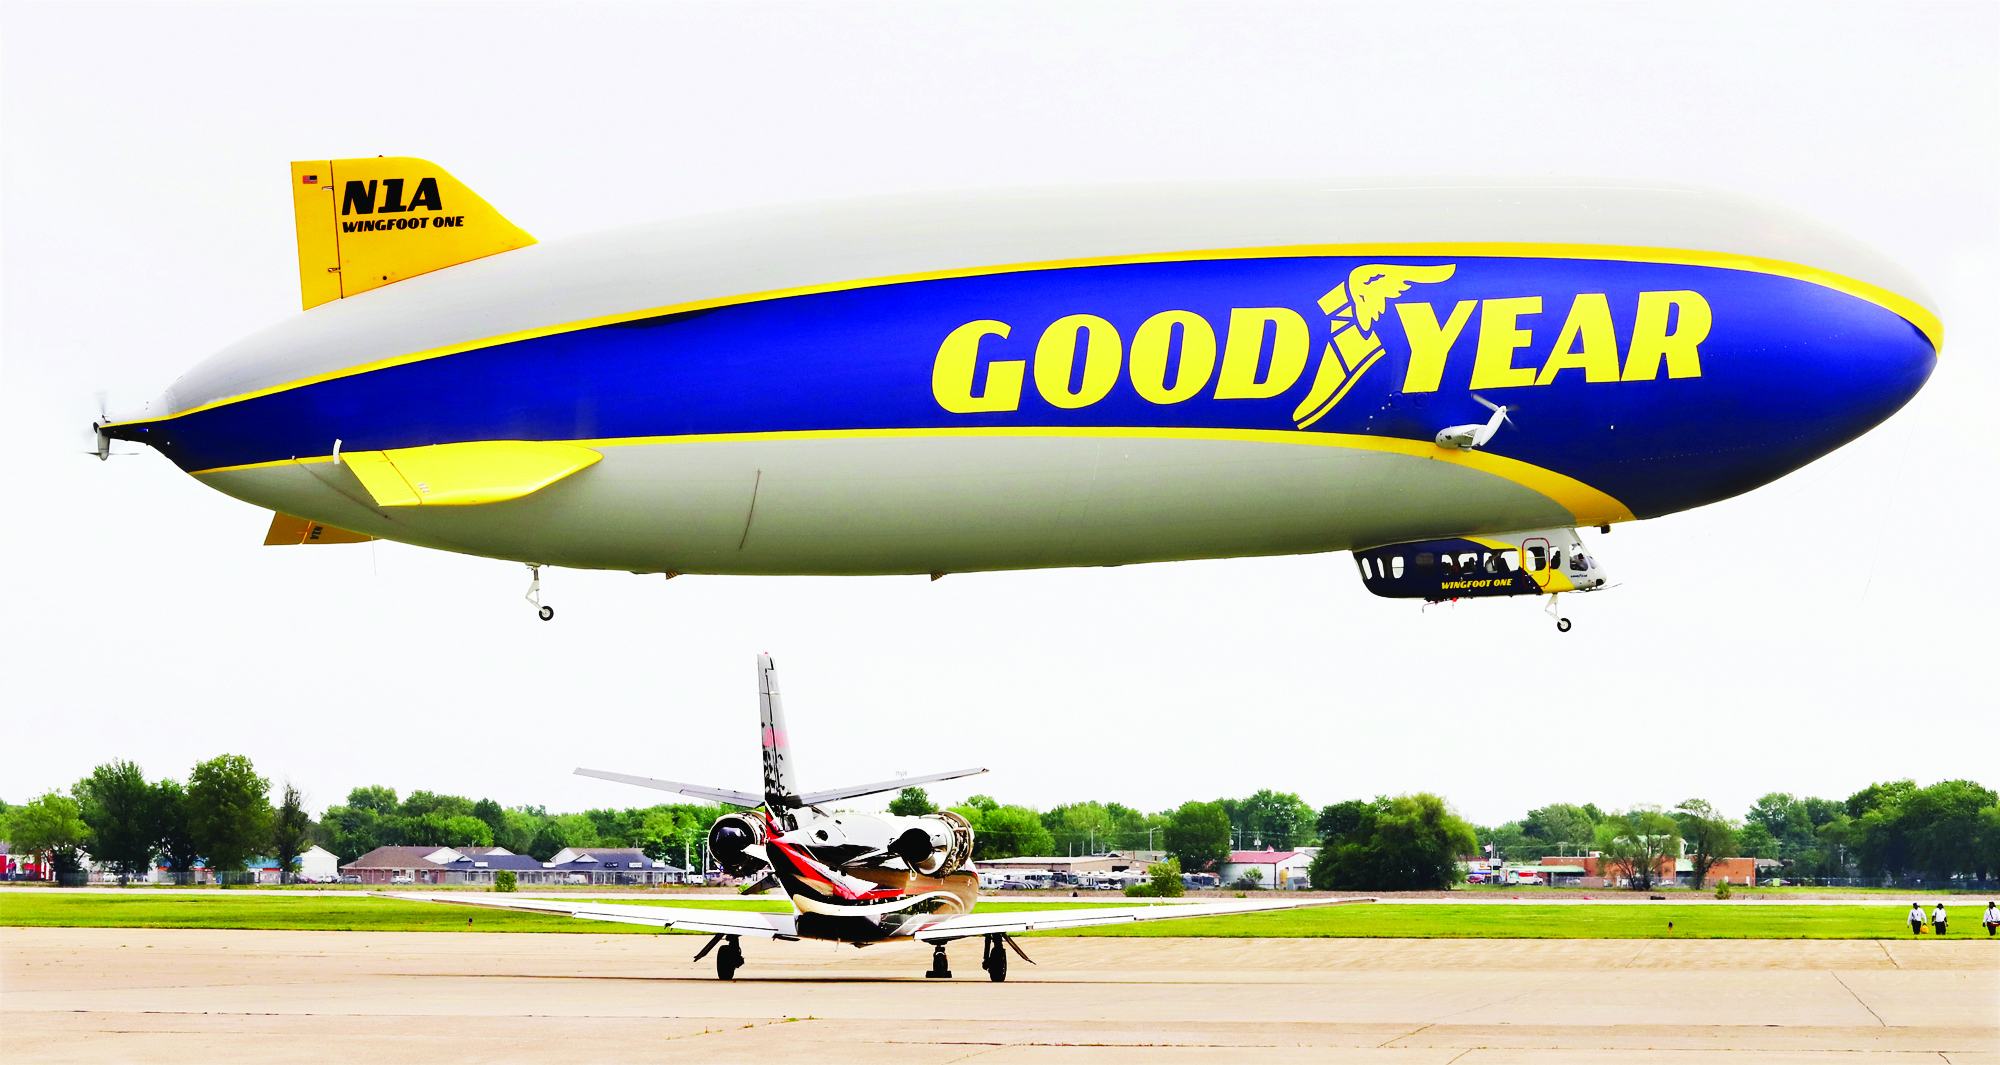 Spend The Night In The Famous Goodyear Blimp